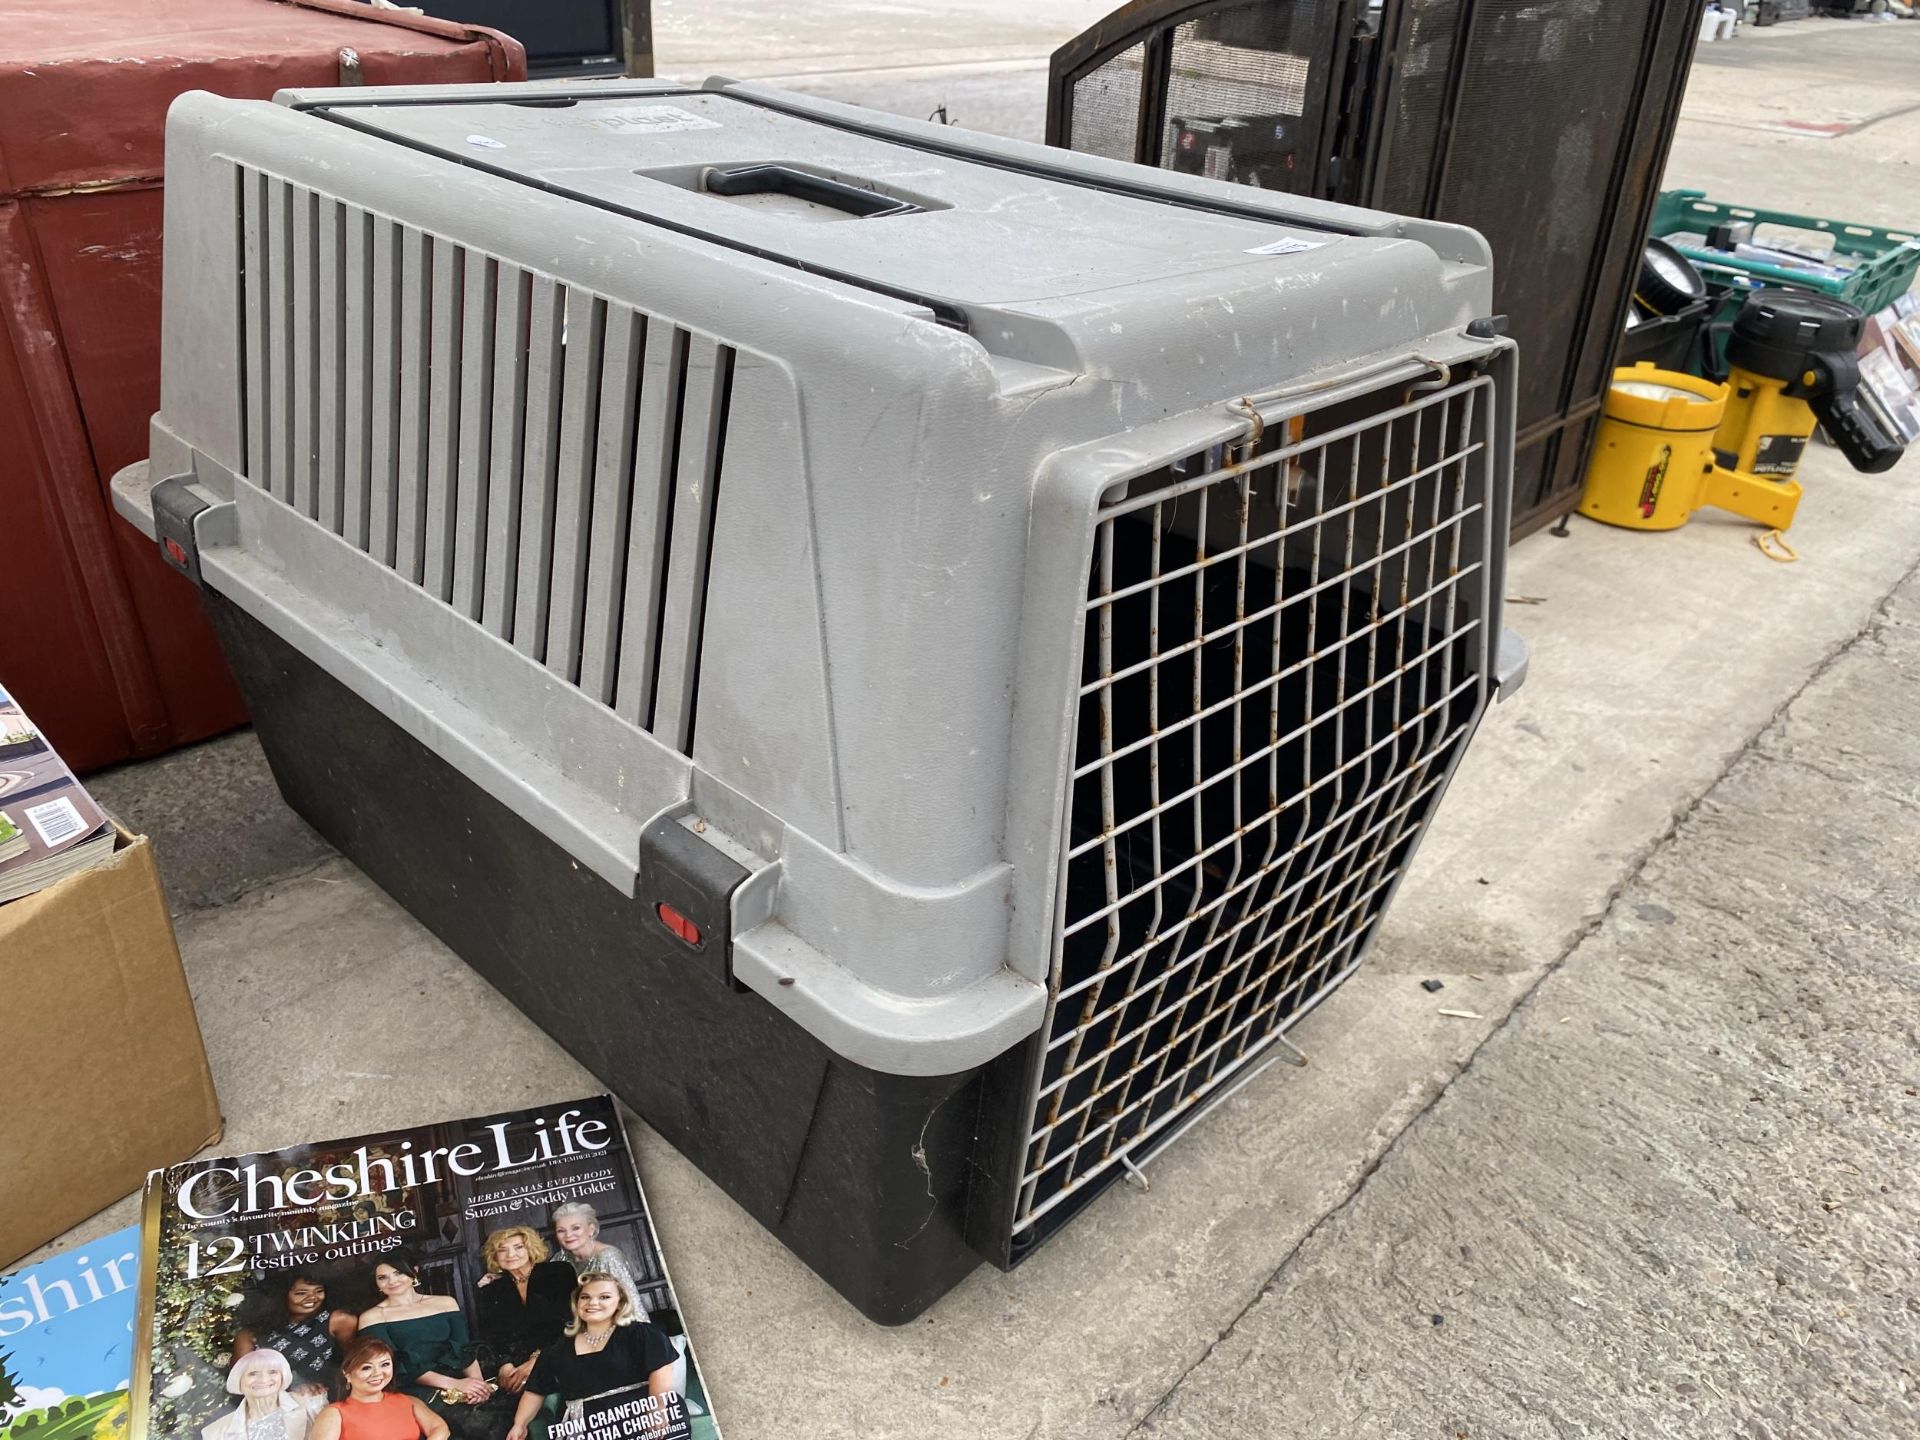 A PET CARRYING CRATE - Image 2 of 2